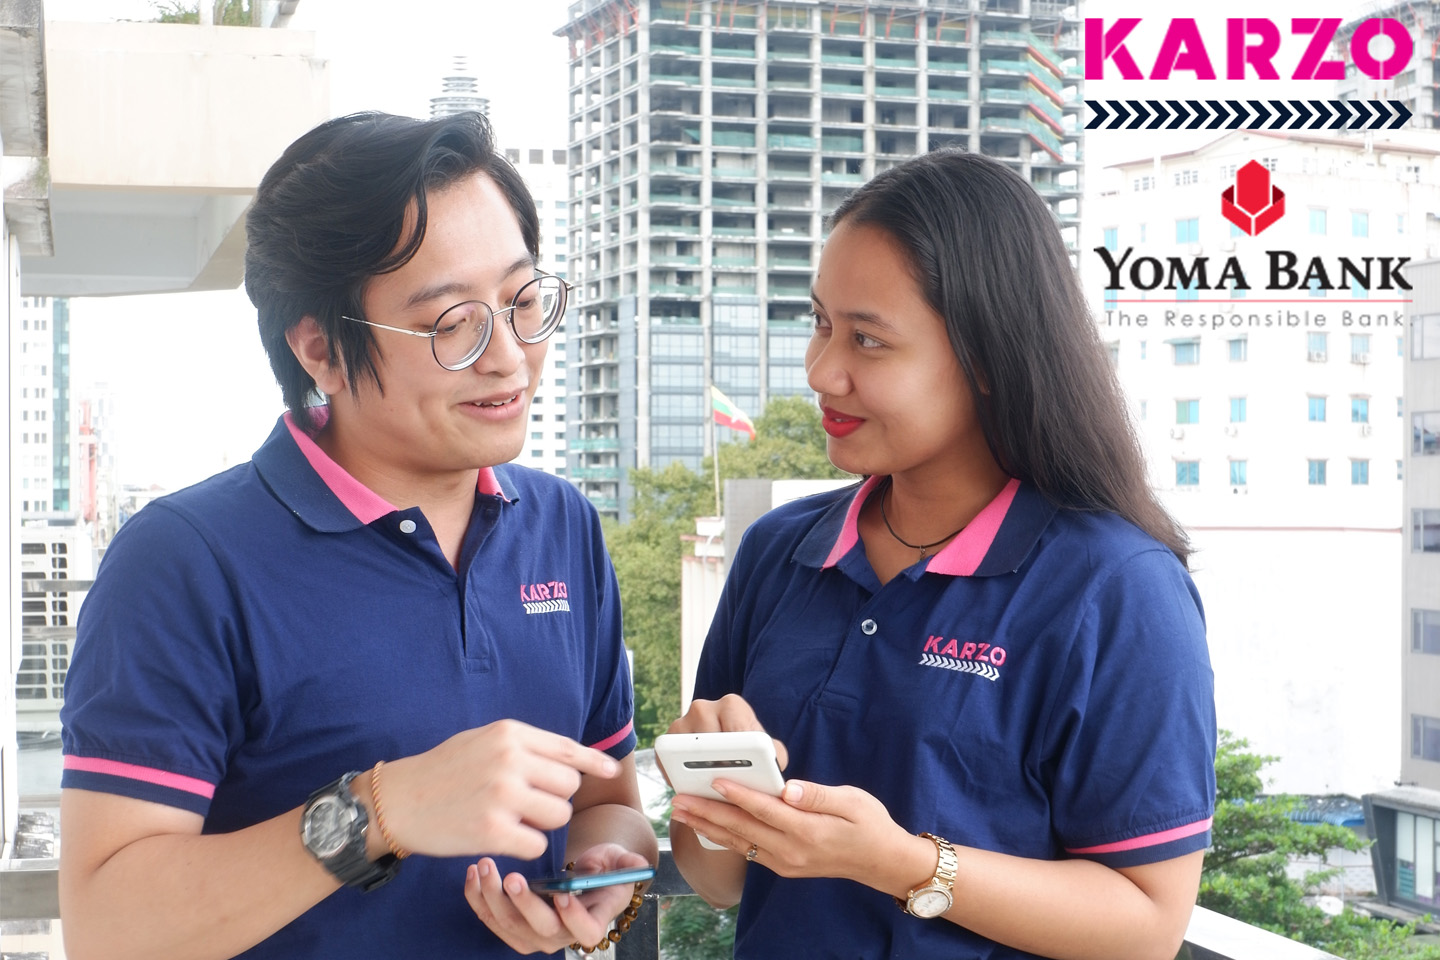 Karzo renews unsecured SME financing deal with Yoma Bank in difficult Myanmar banking environment